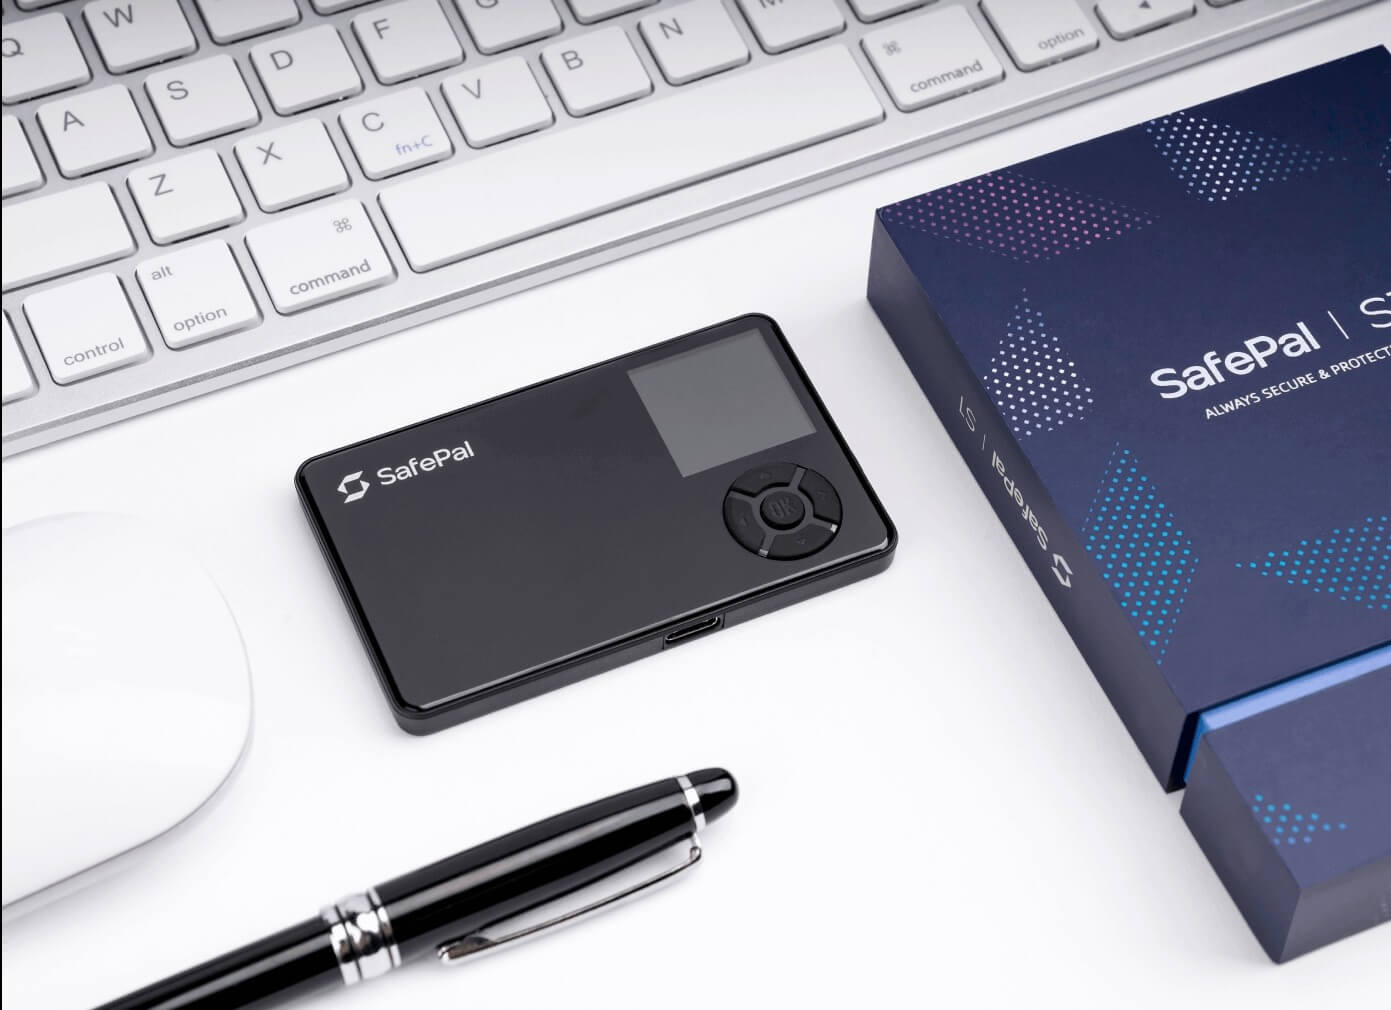 A SafePal S1 hardware wallet face up on a computer desk with a pen, a mouse and a keyboard next to it.